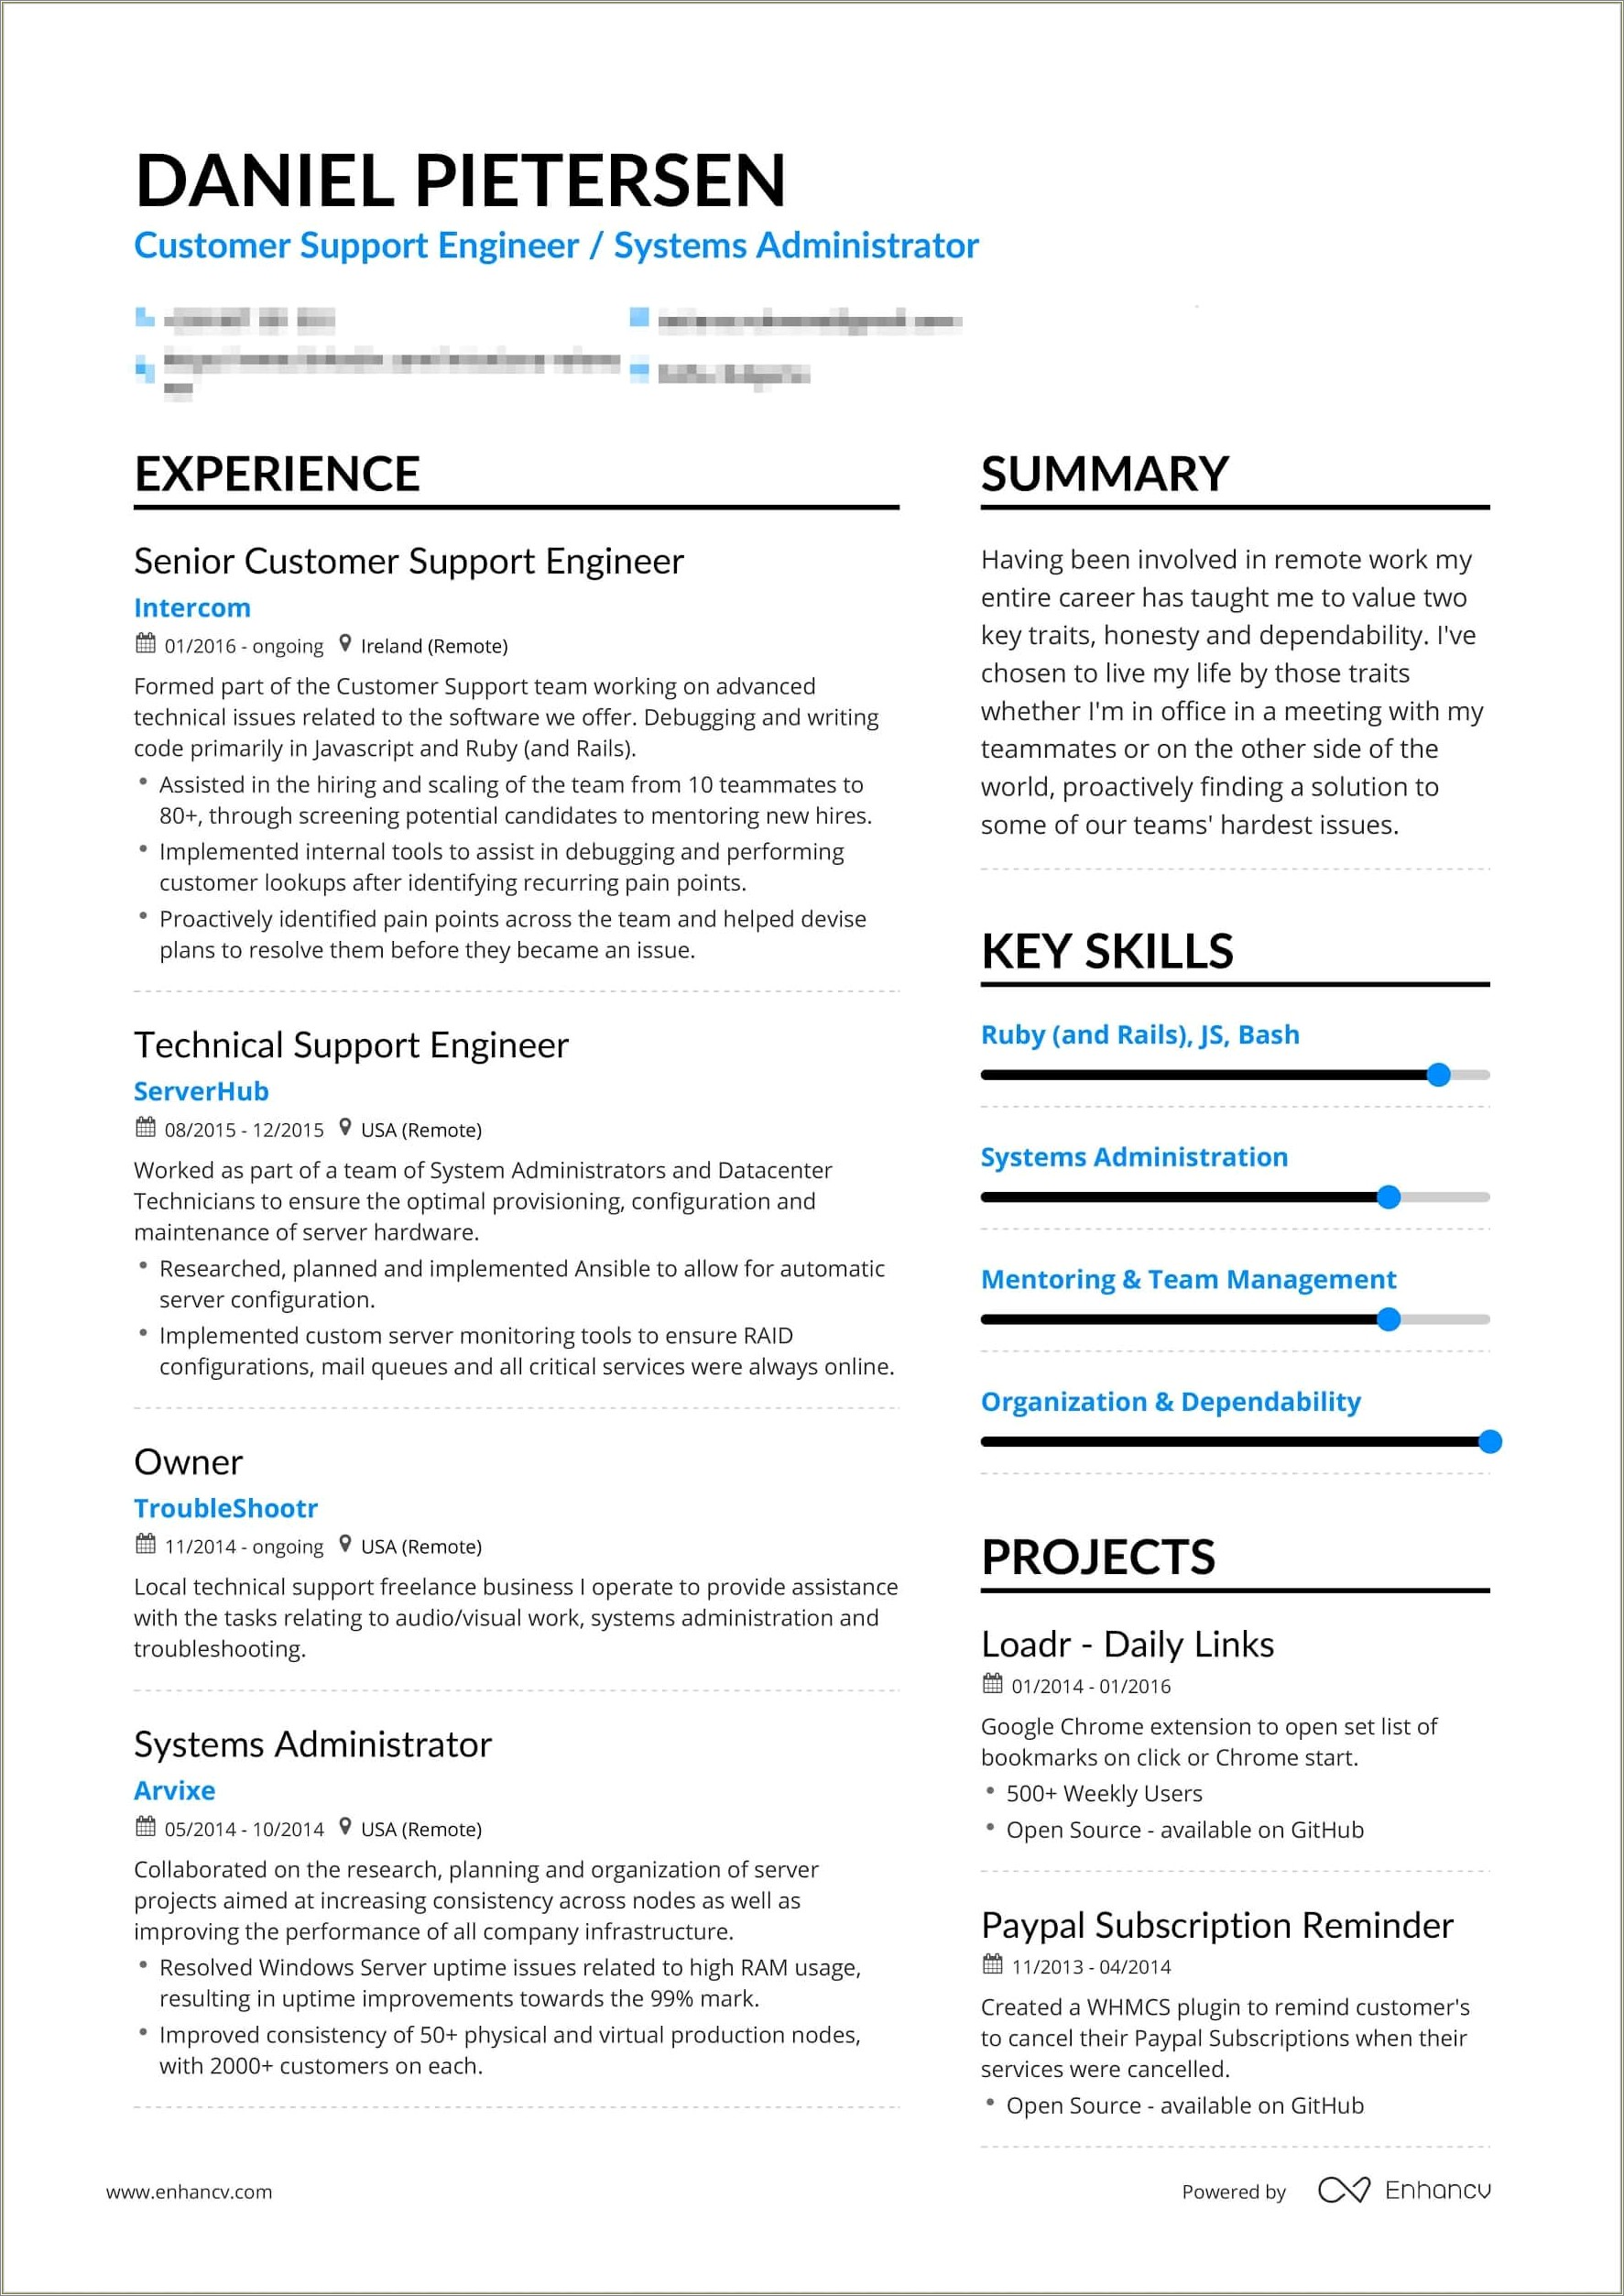 Other Words For Extensive Experience On Resumes